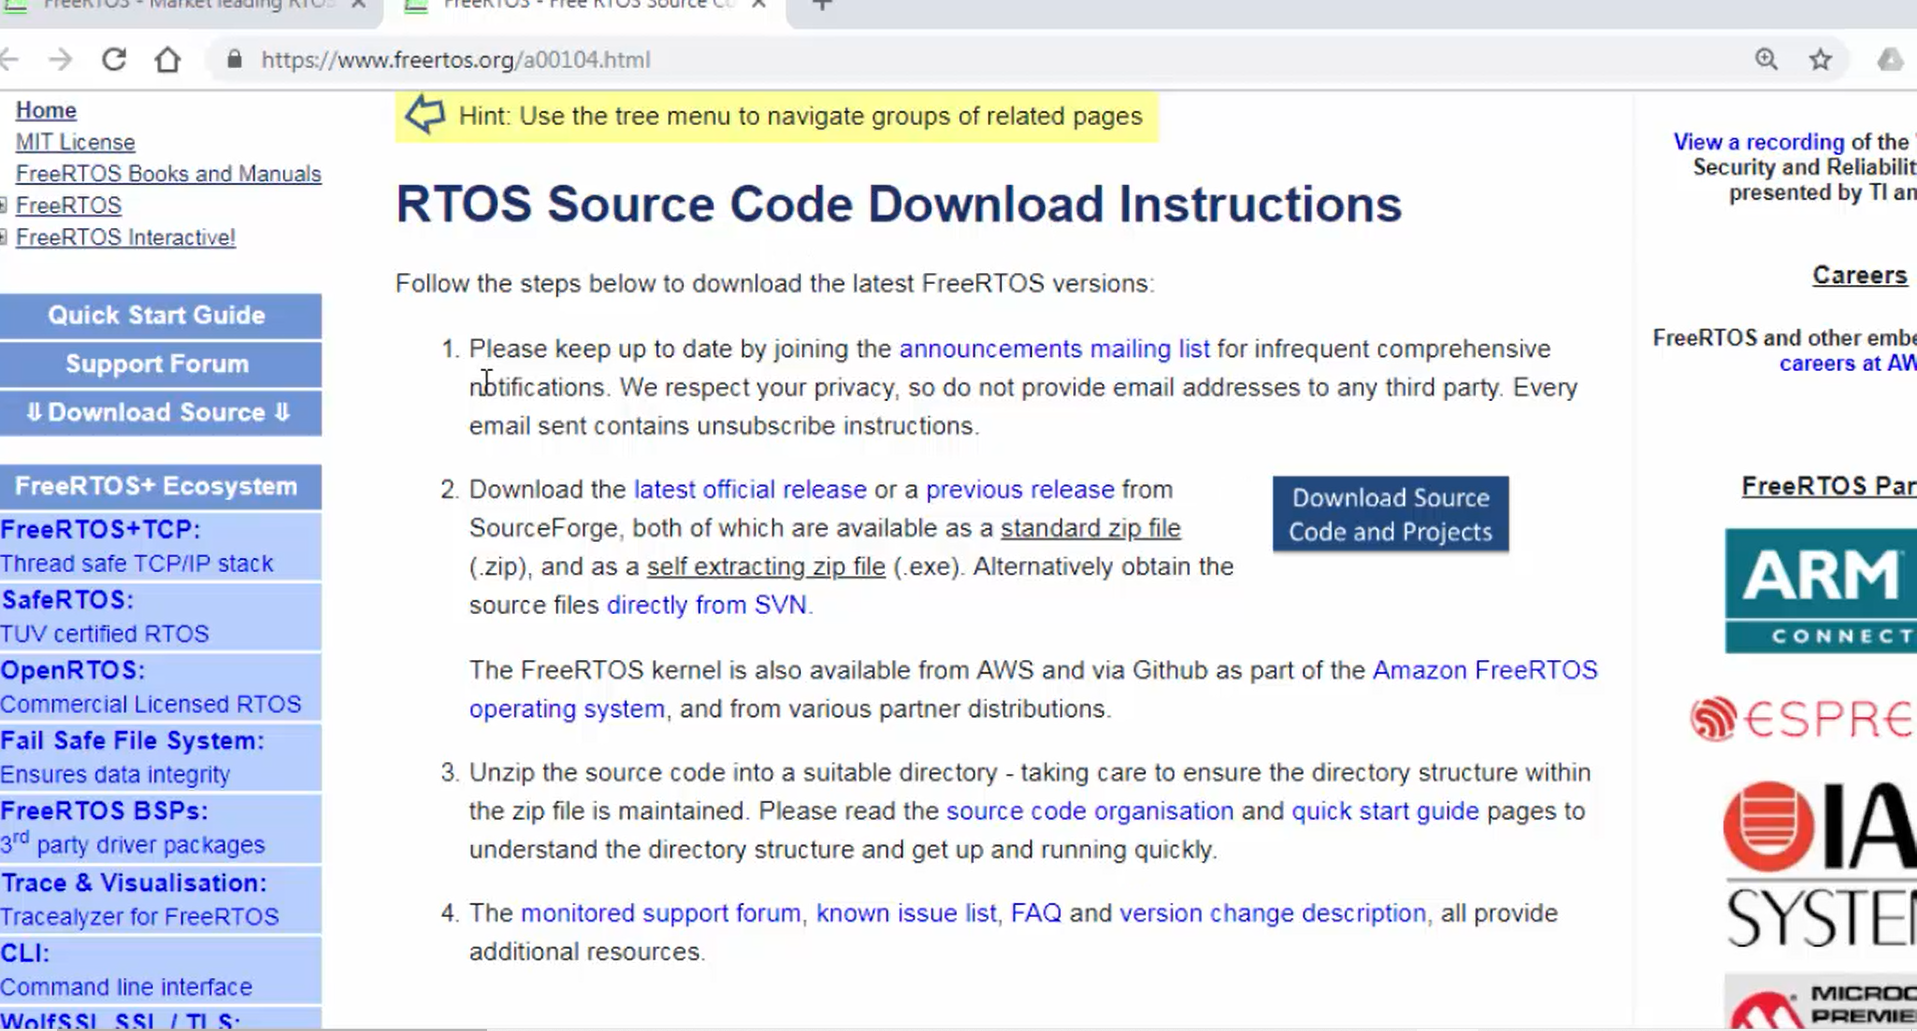 Web page to download RTOS source code